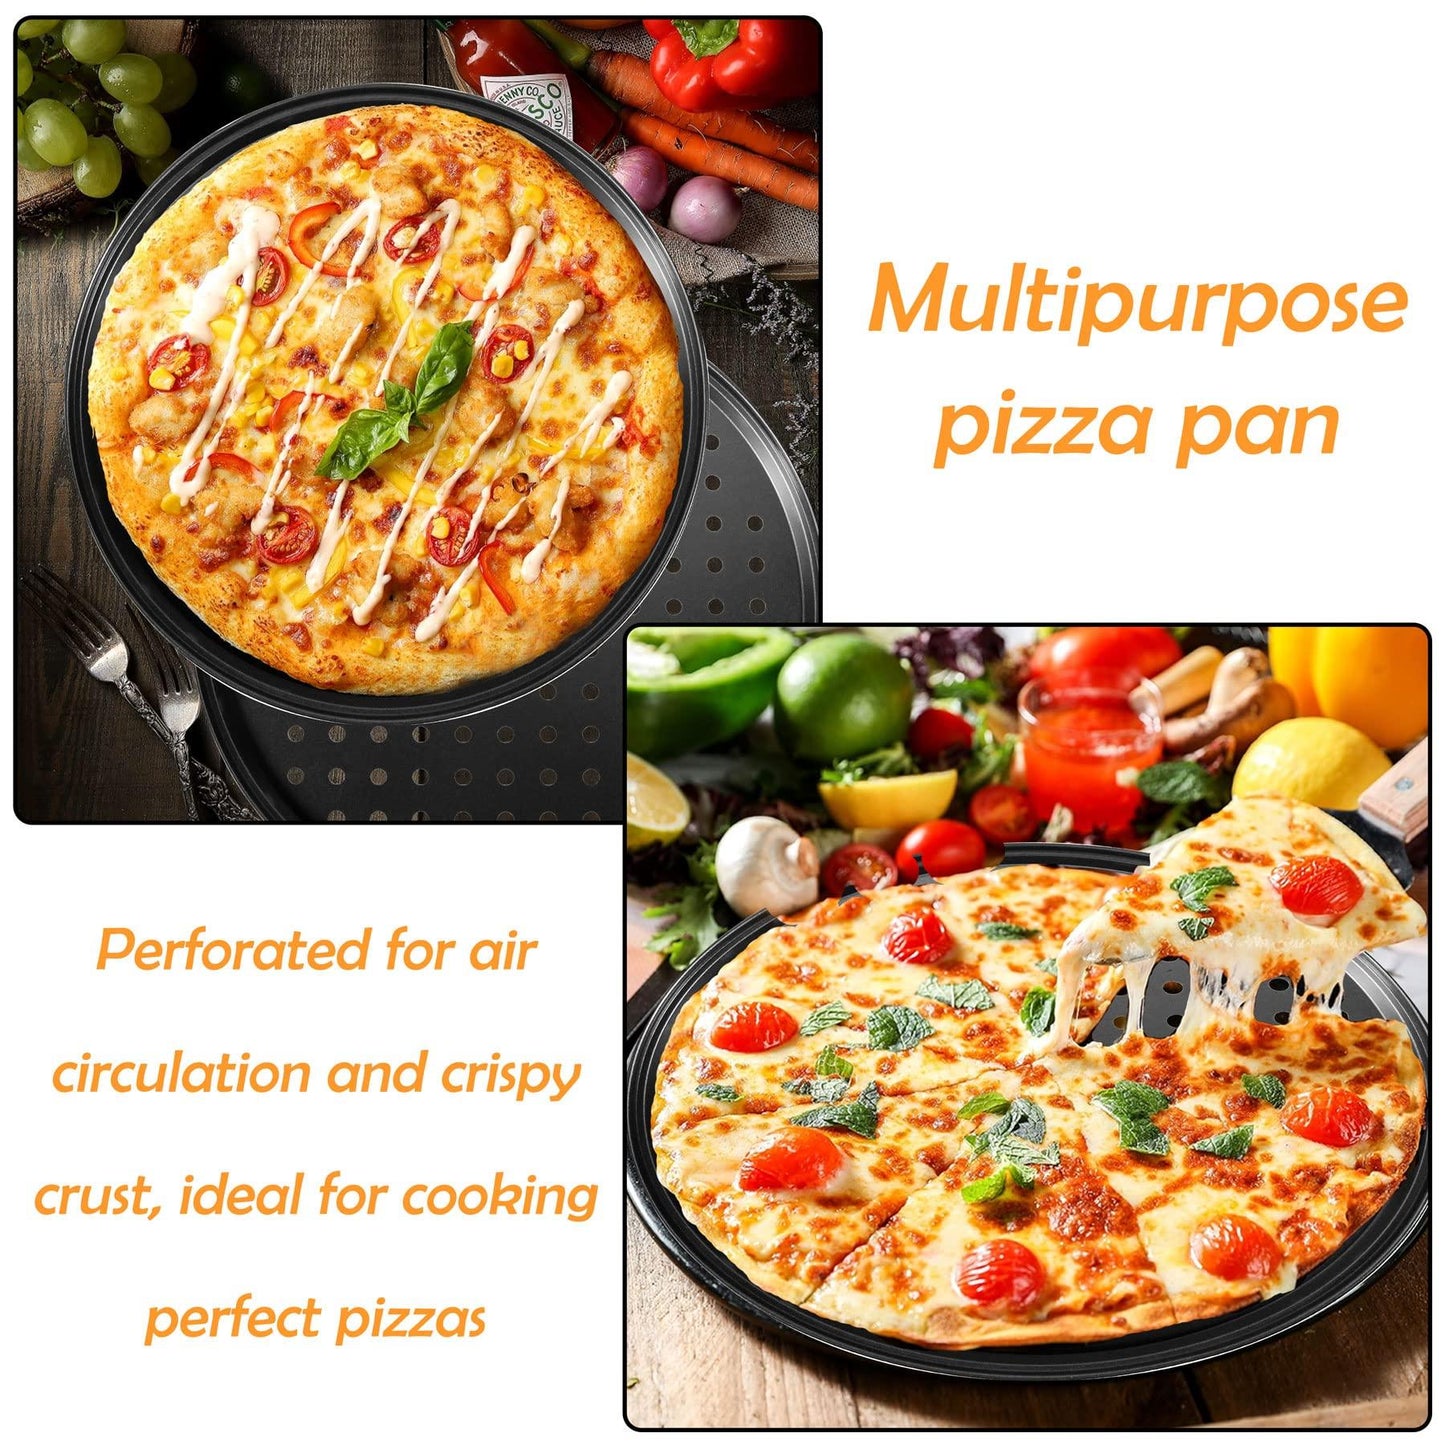 mobzio 2Pcs Pizza Pans for Oven, Round Pizza Pan with Holes, 12 inch Pizza Tray for Oven, Baking Steel Pizza Oven Accessories, Nonstick Pizza Plates Bakeware Sets For Home Restaurant Kitchen - CookCave